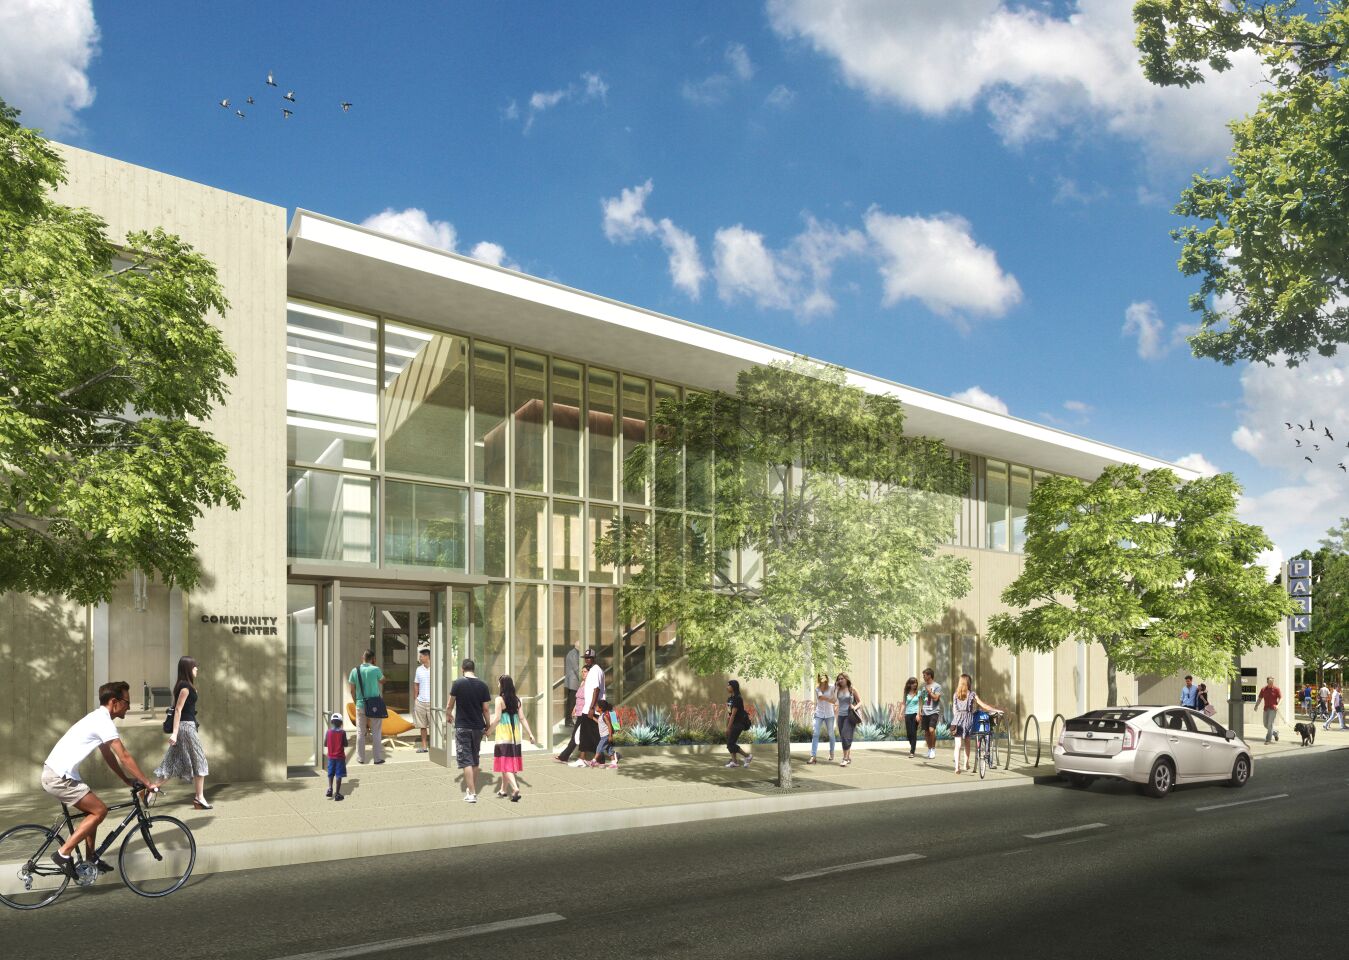 Downtown's first community center will be a 14,200 square-foot, two-story building with a half basketball court, demonstration kitchen and staff offices for the city's parks and recreation department.